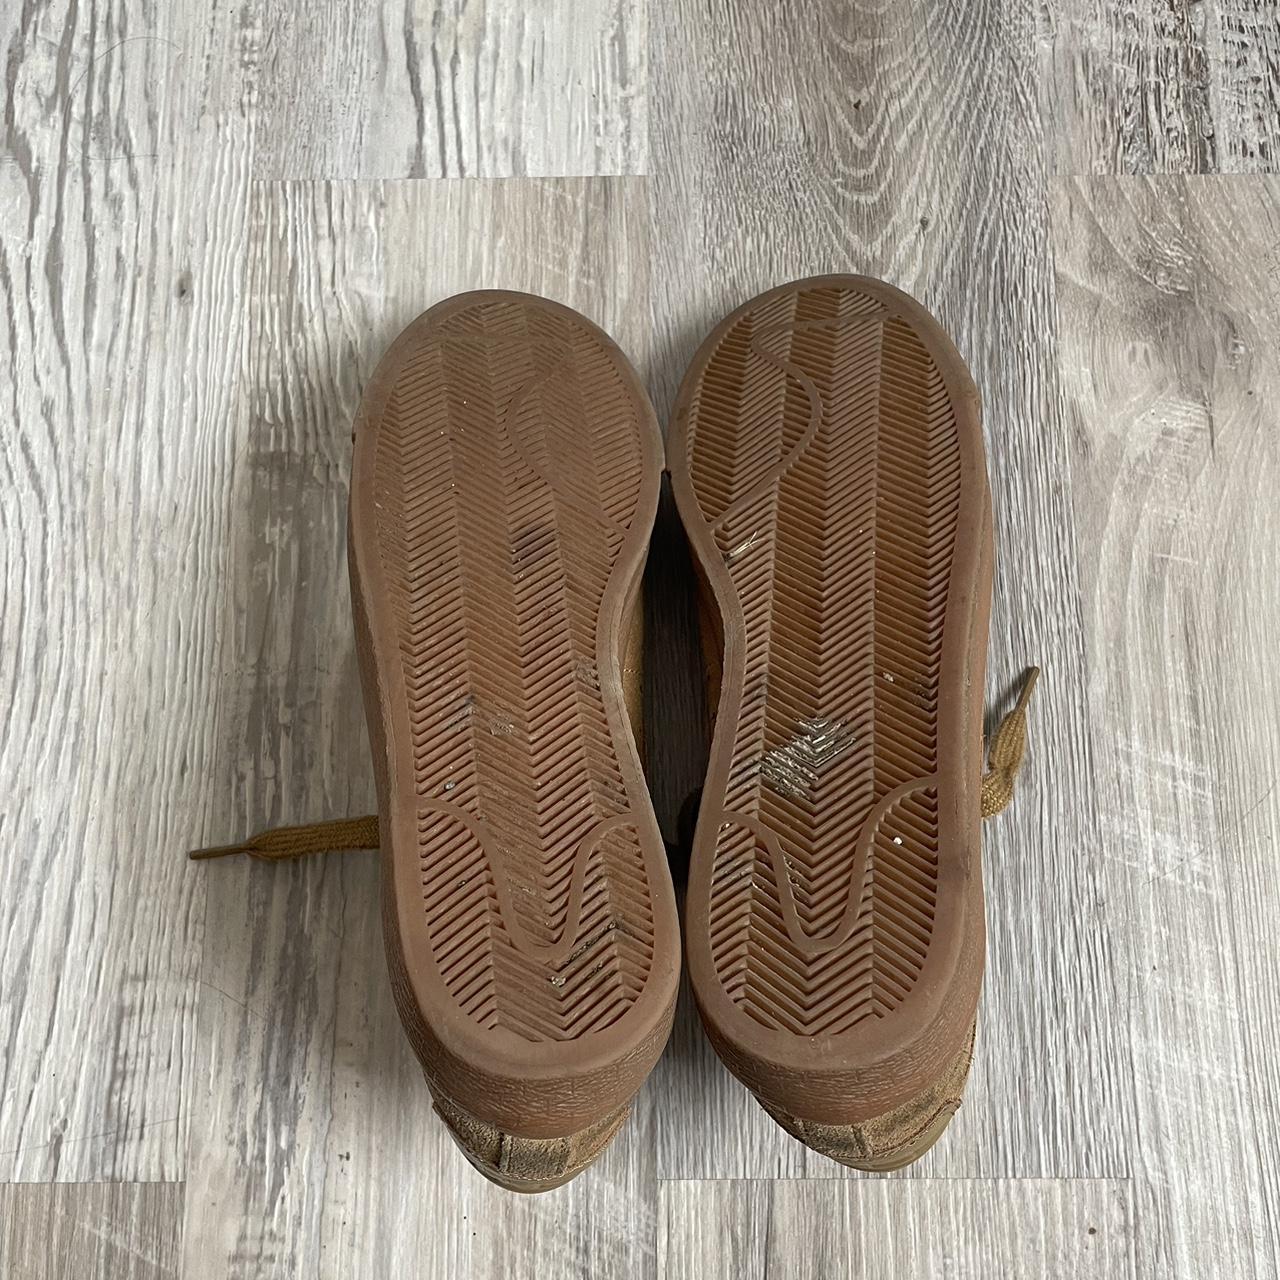 Supreme Men's Tan and Brown Trainers (4)